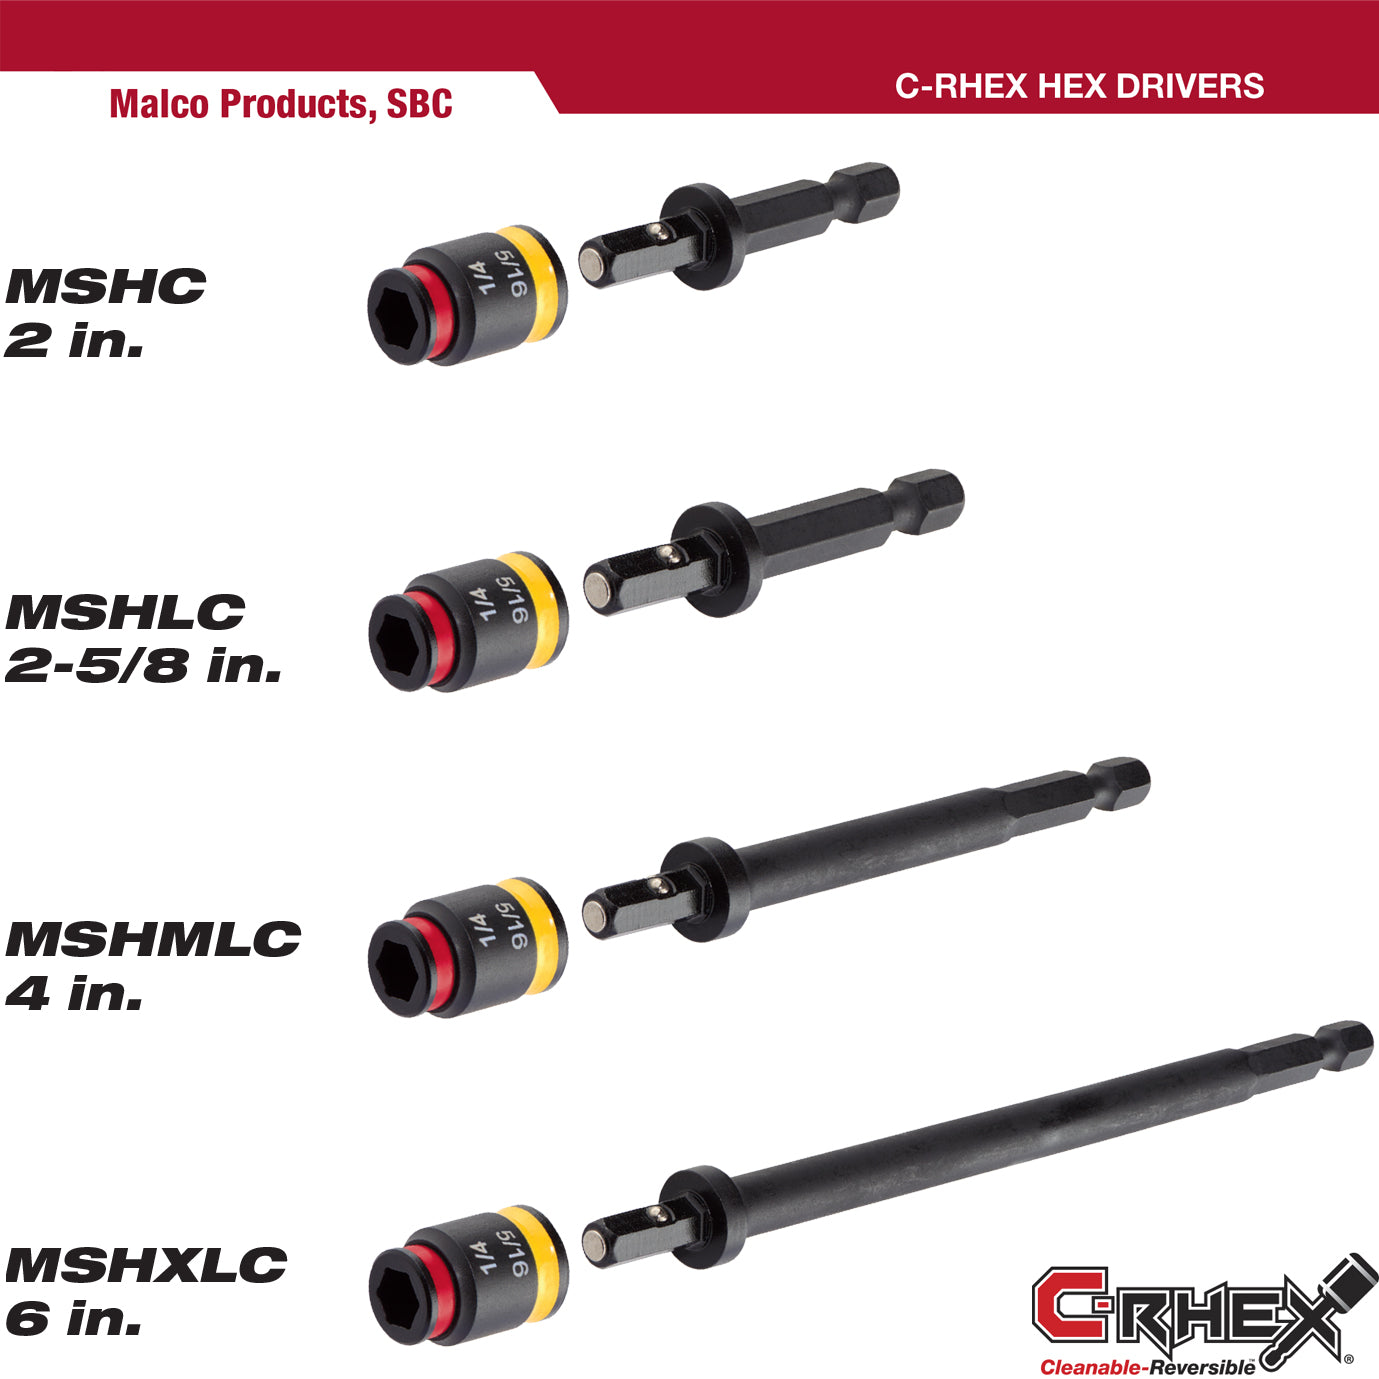 MSHXLC - C-RHEX Cleanable, Reversible Magnetic Hex Drivers, 1/4" and 5/16", 6" Length